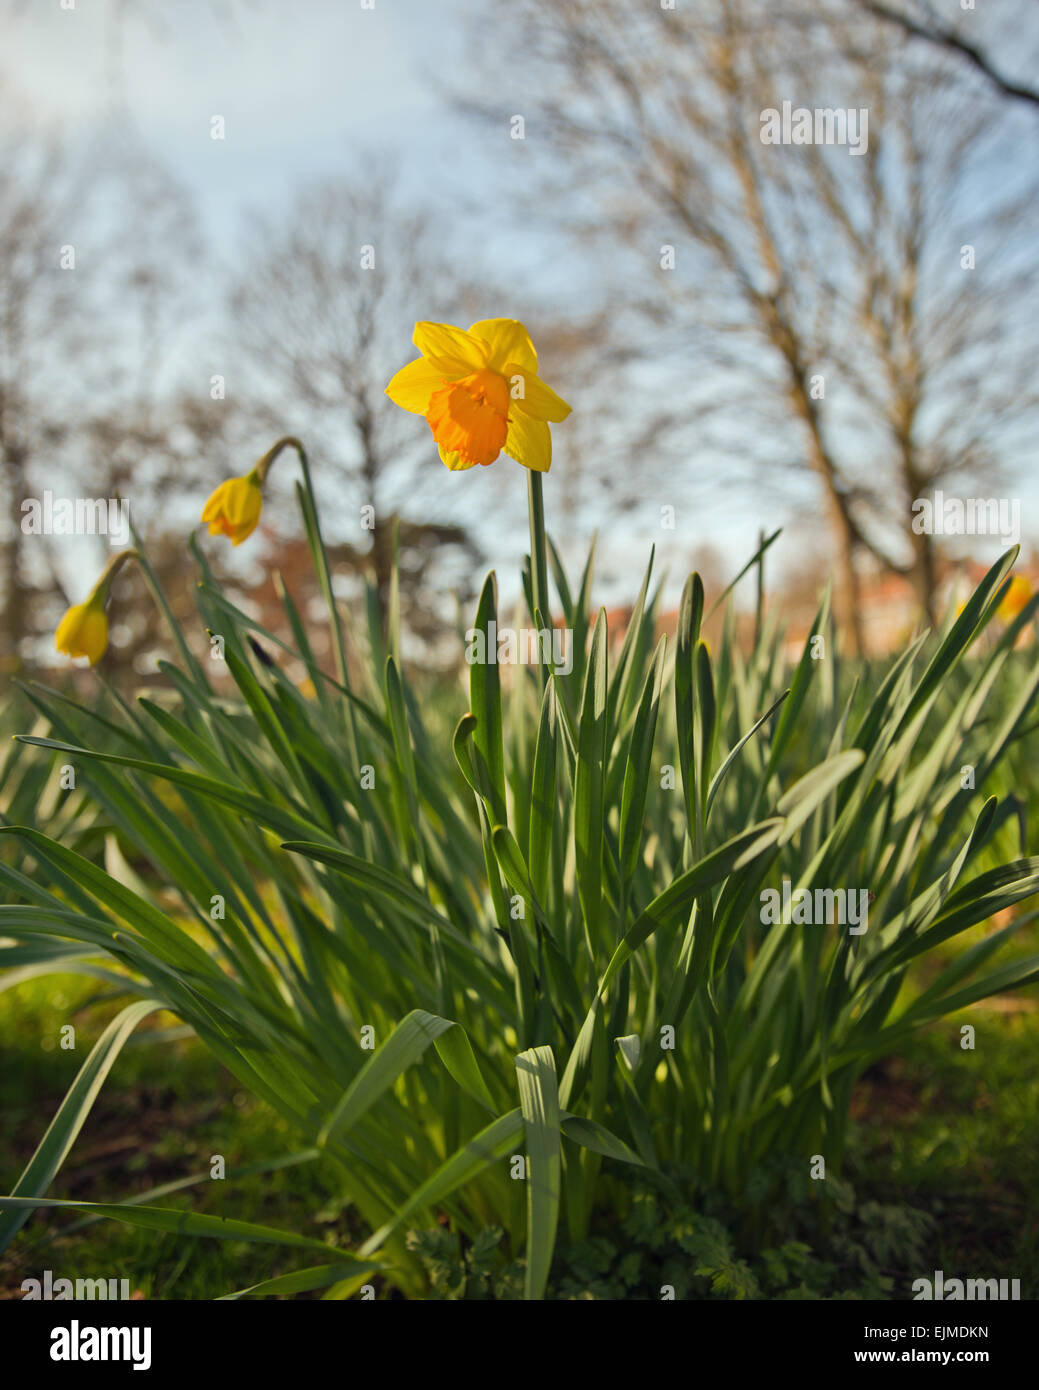 daffodils park UK trees spring flowers Stock Photo